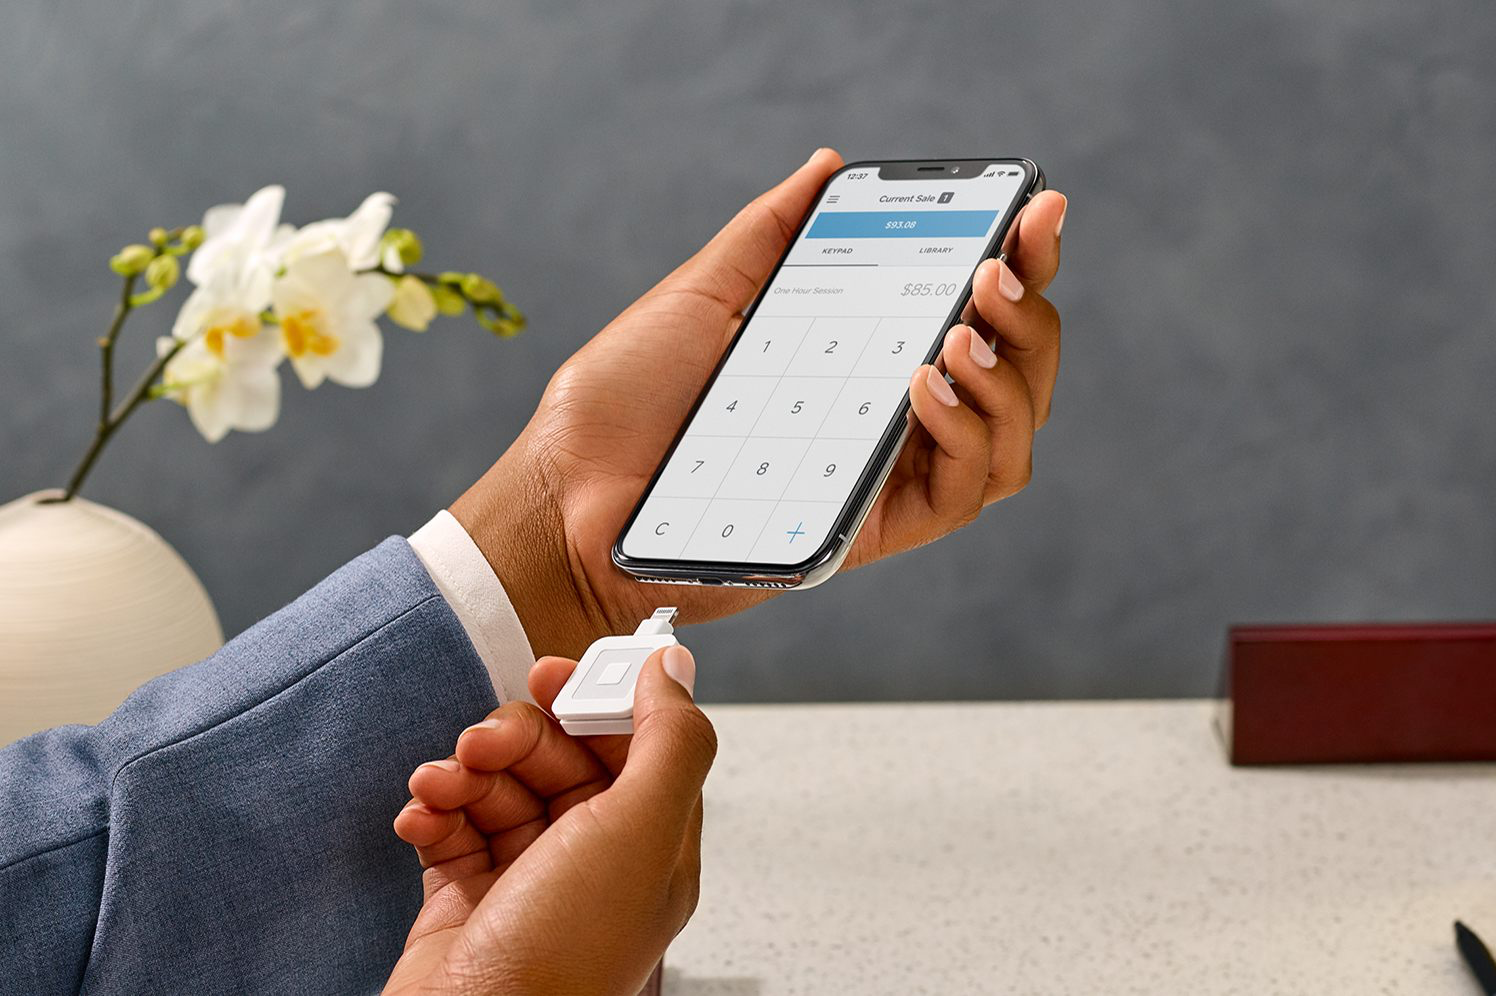 square-introduces-new-lightning-credit-card-reader-for-iphones-without